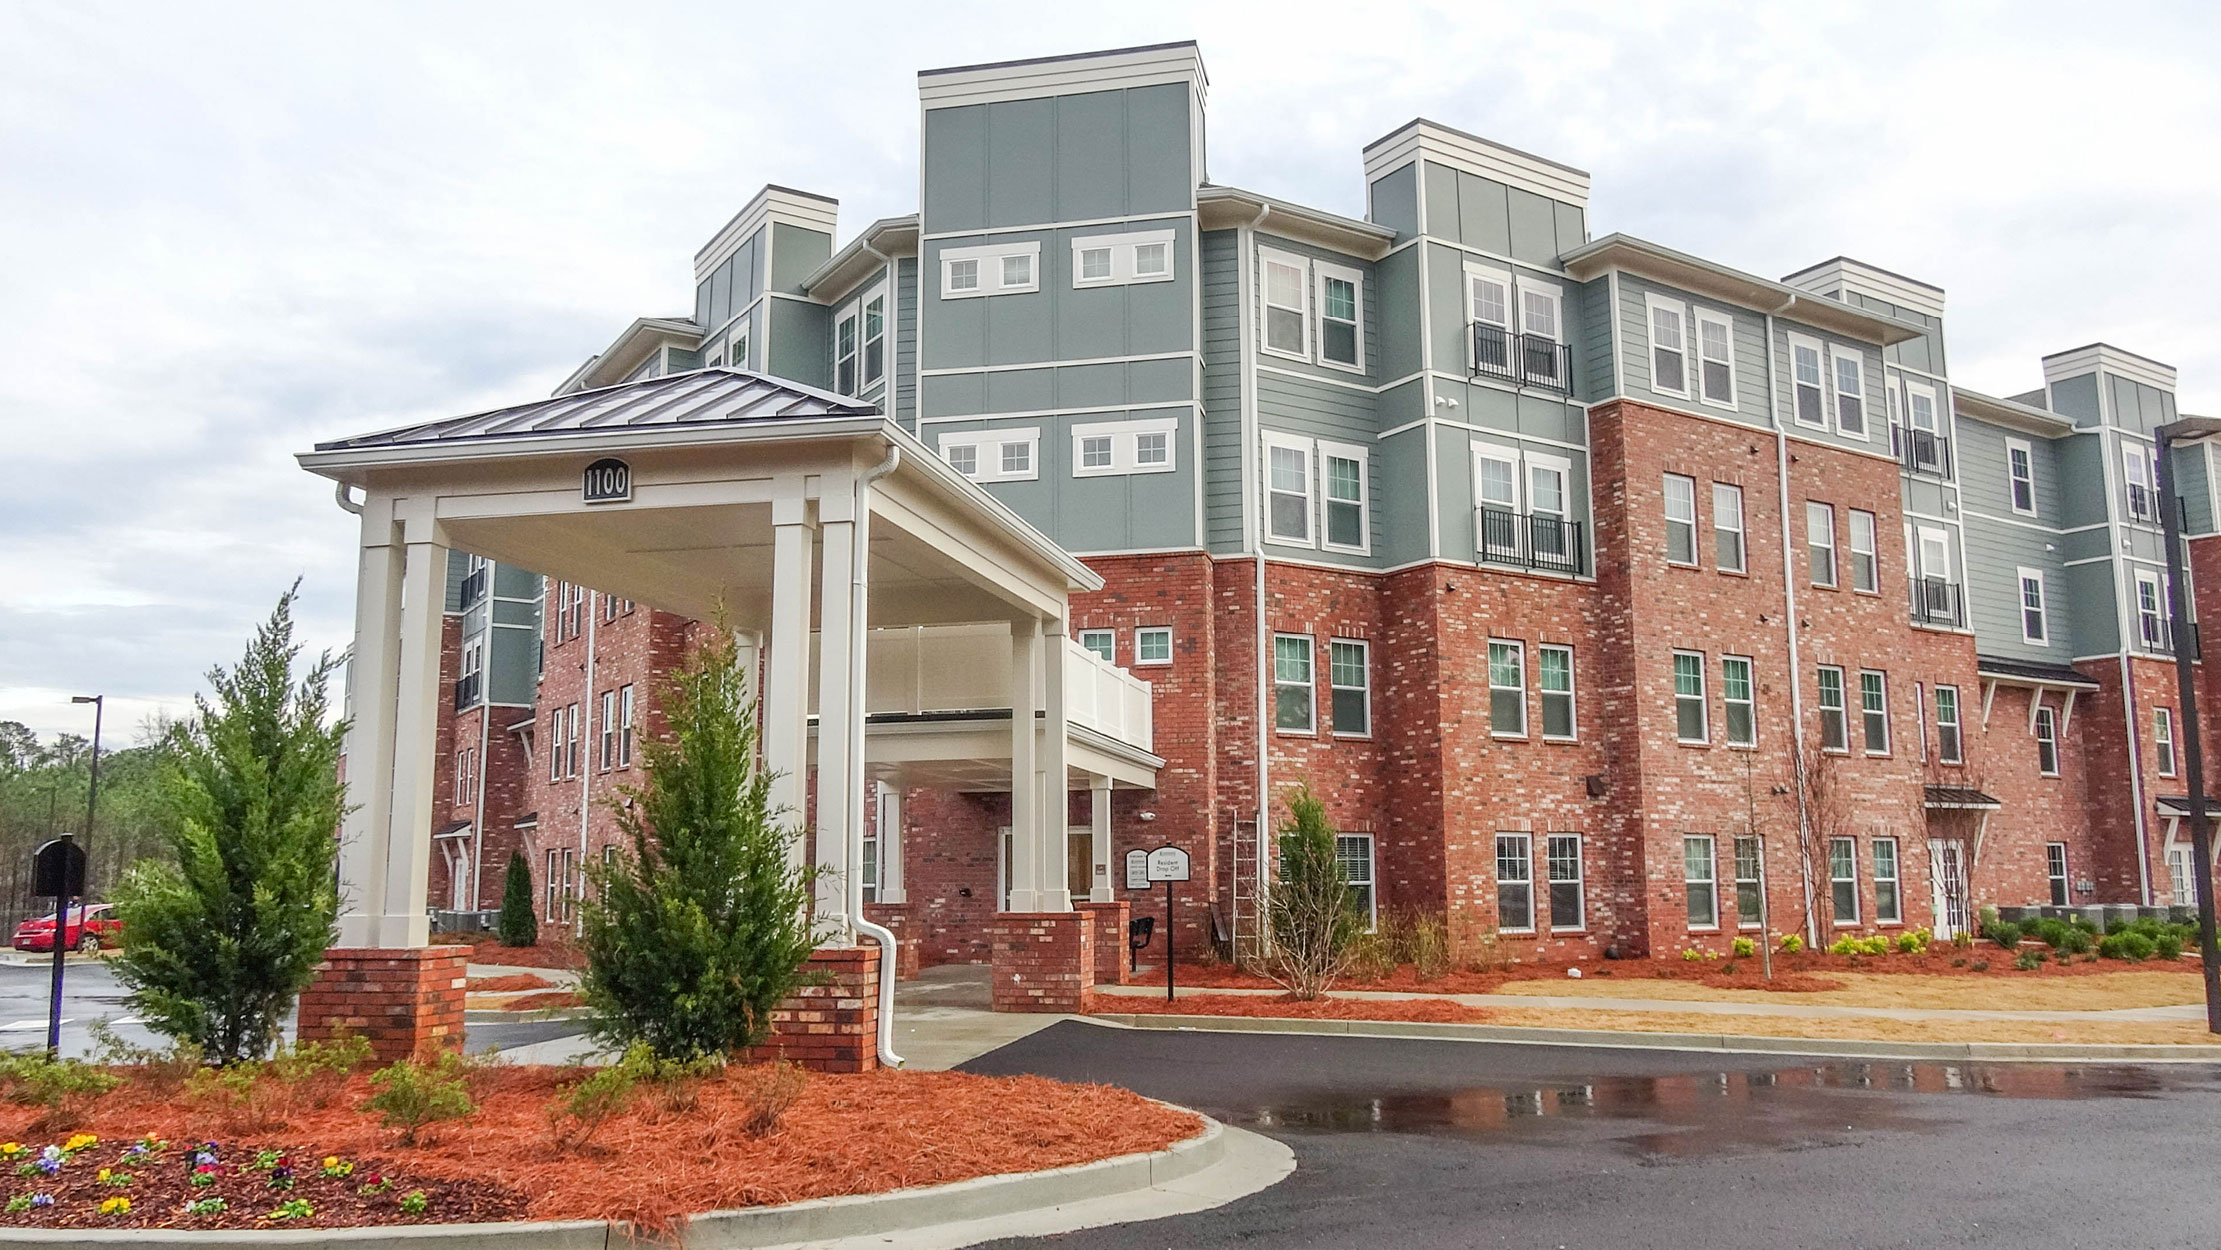 Evermore Senior Village, a new Fairway Management affordable senior community located in Snellville, Georgia, began moving residents in at the end of February 2019.